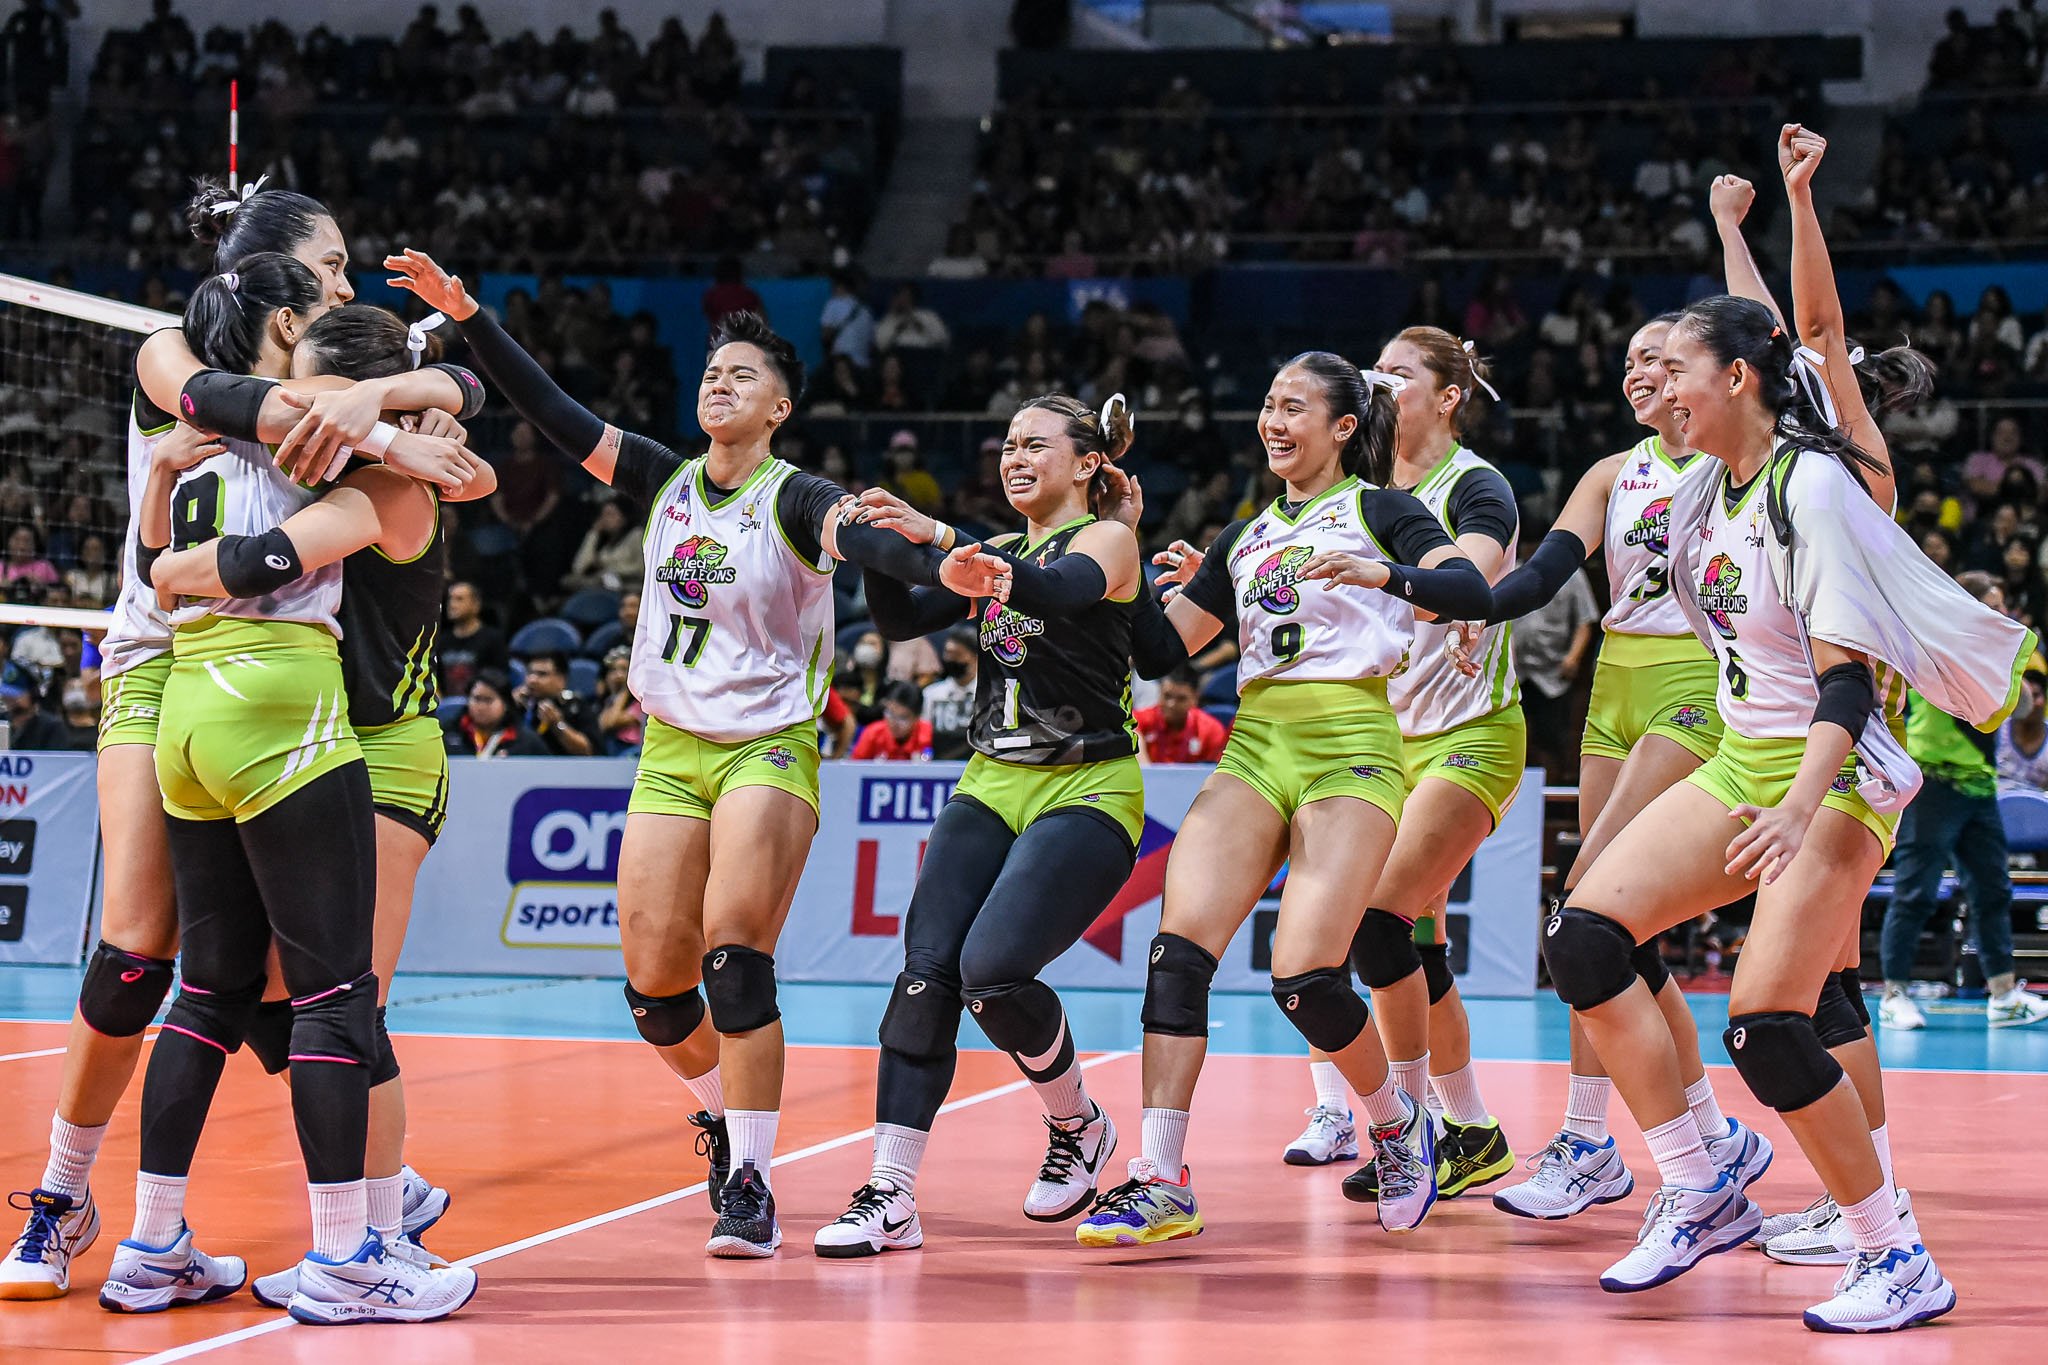 Nxled Stuns Akari Stays In Semis Race News Pvl Premier Volleyball League